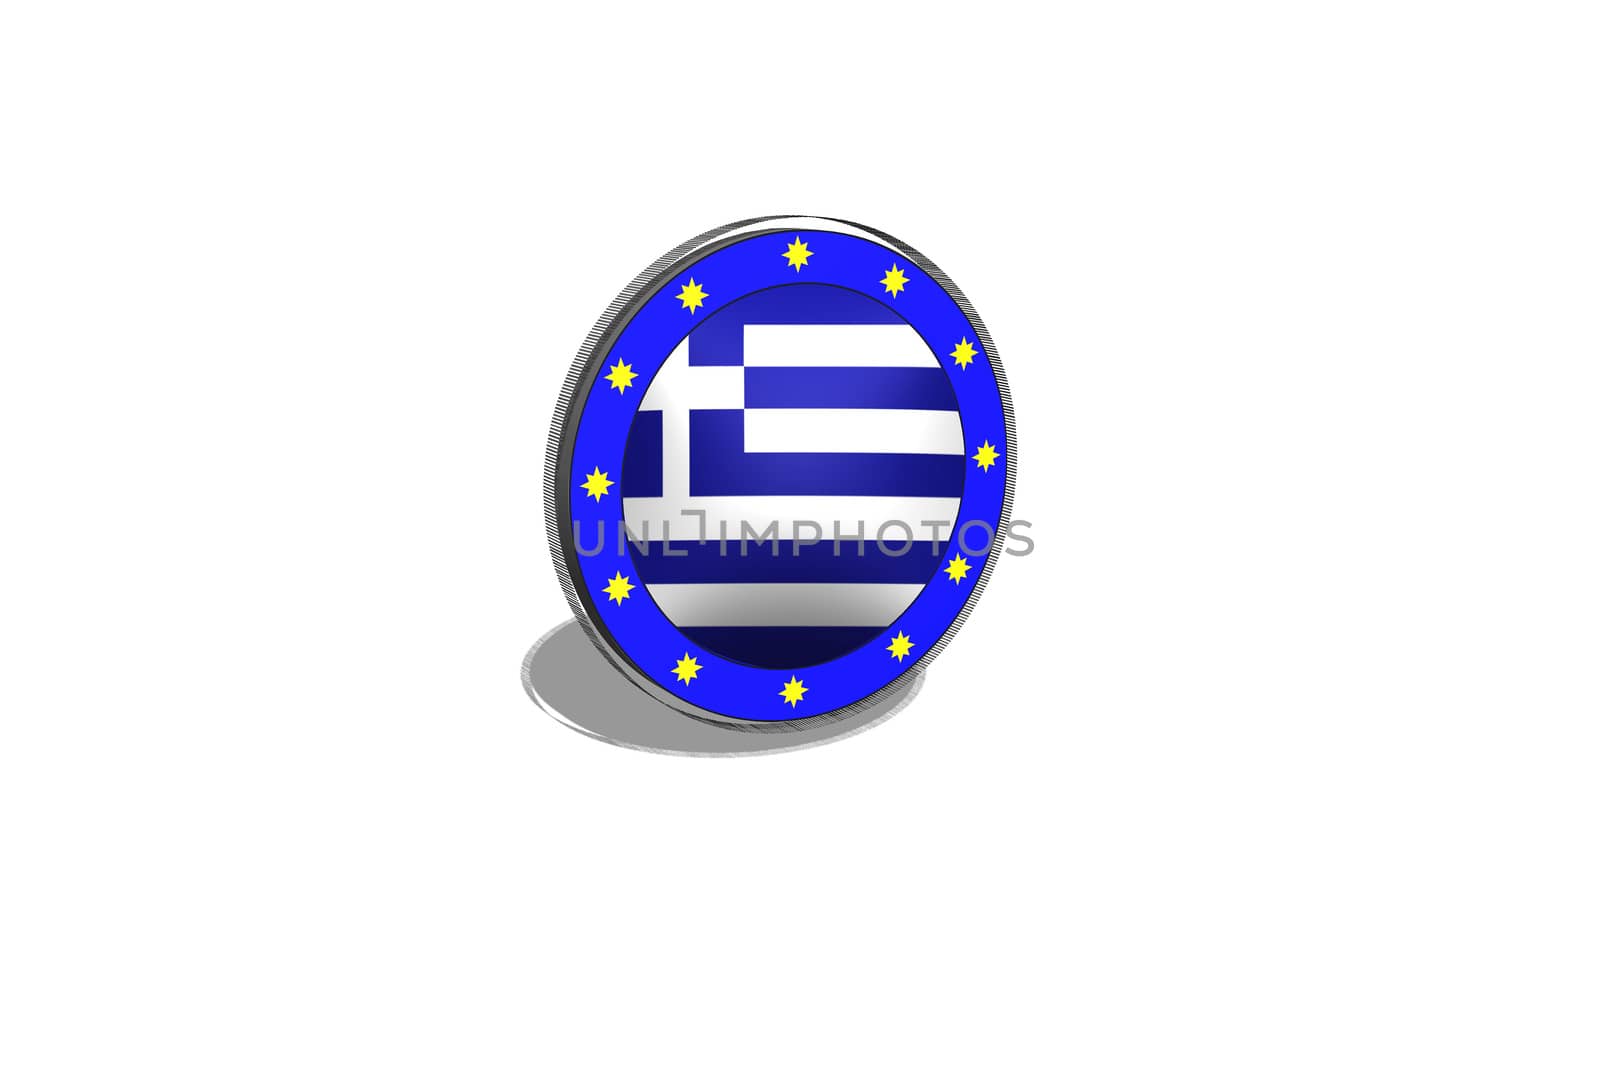 EU button on a button with Greek flag. 3D image - Illustration.